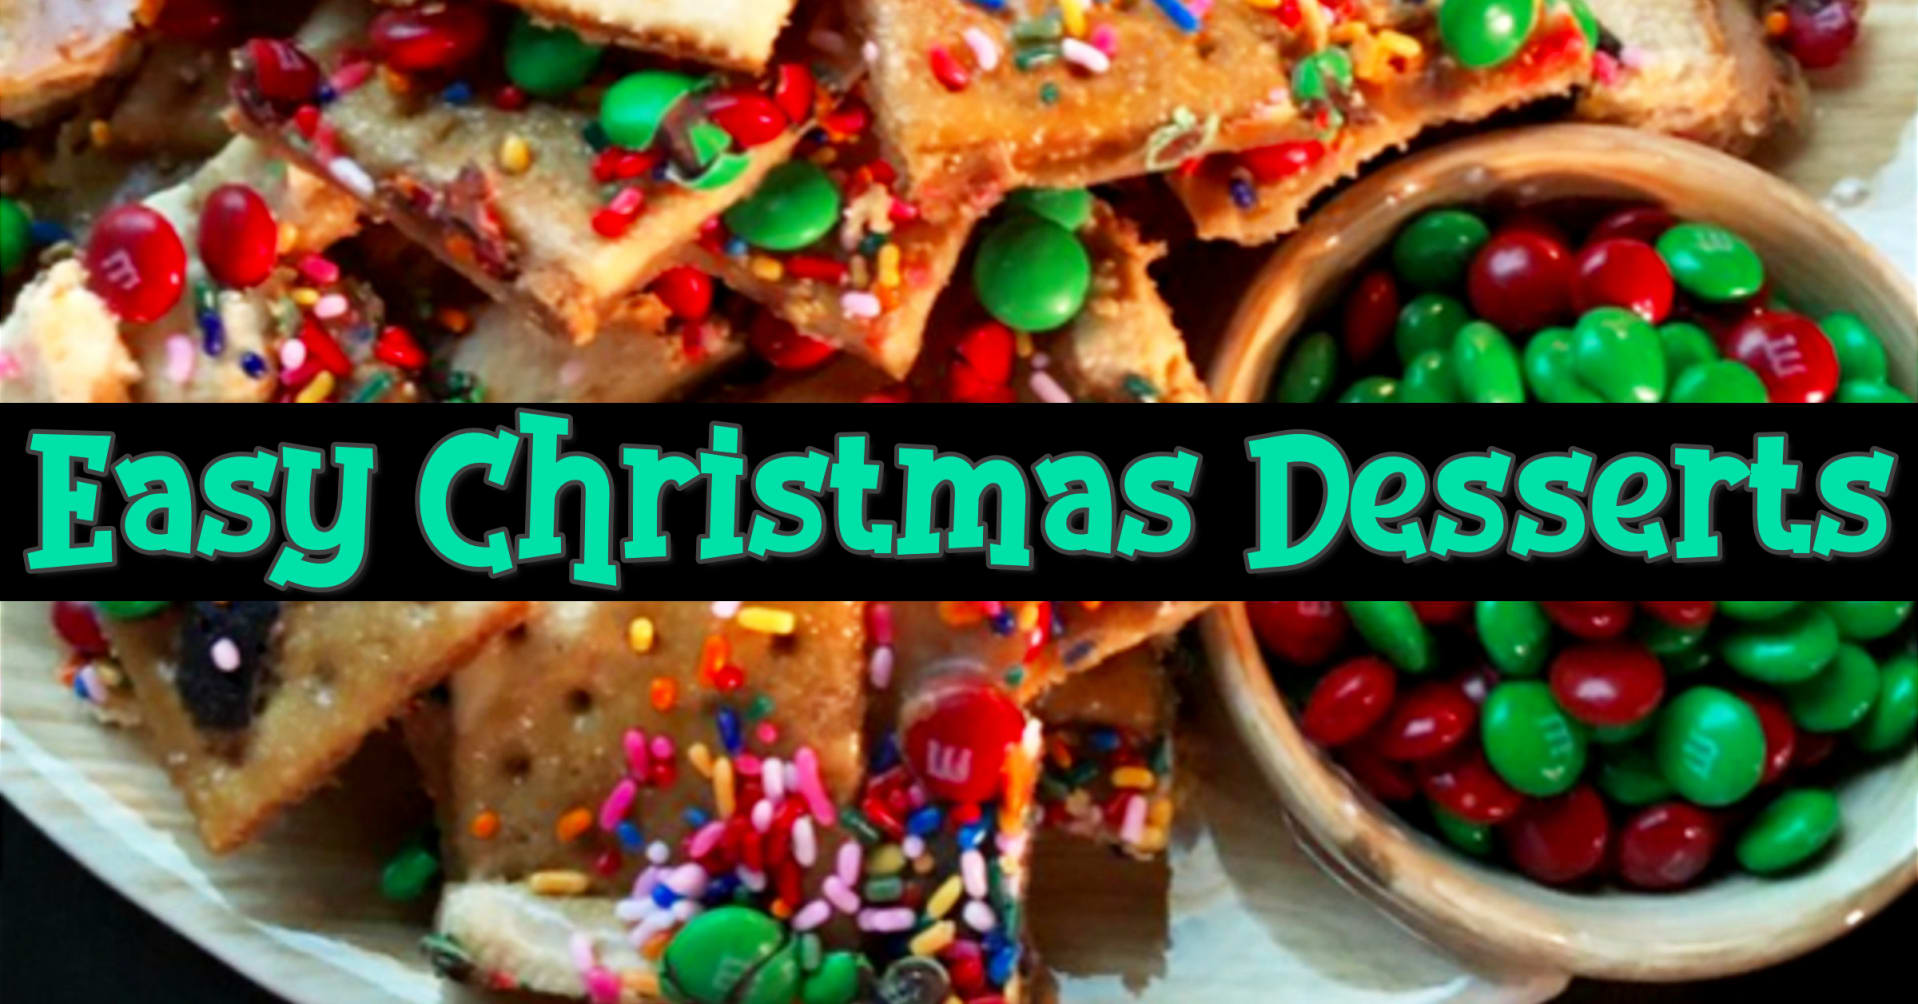 Easy Christmas Dessert Ideas – Creative Christmas Desserts for a Party or for a Crowd